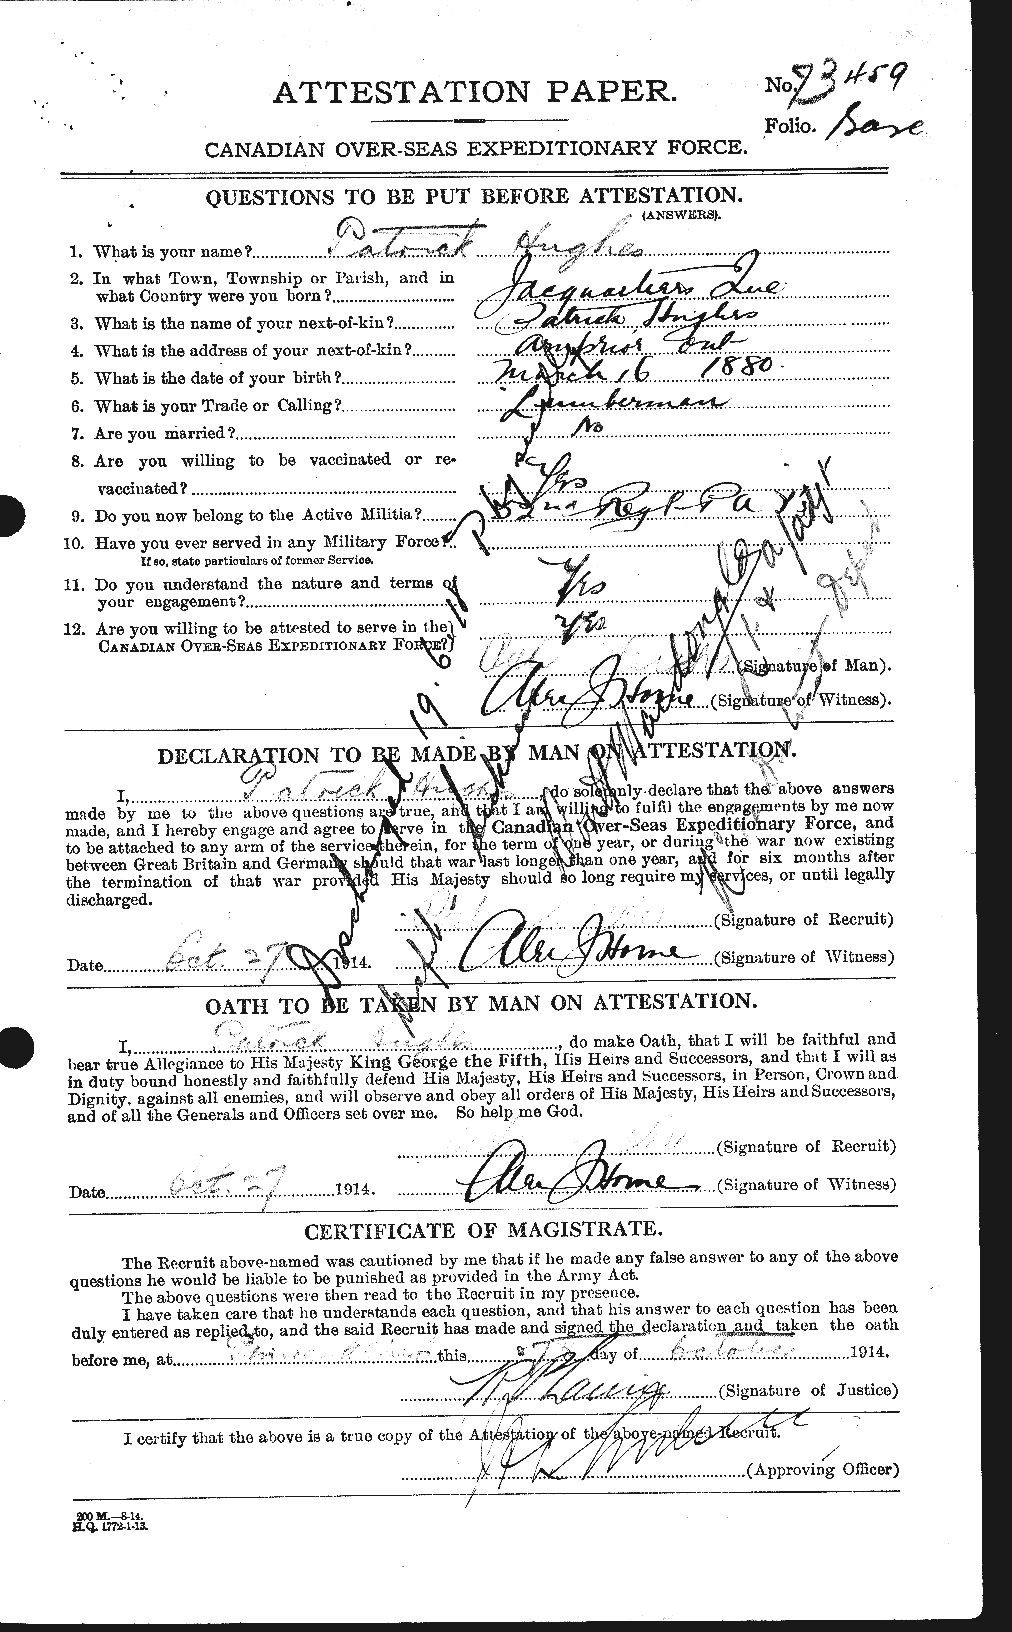 Personnel Records of the First World War - CEF 404147a